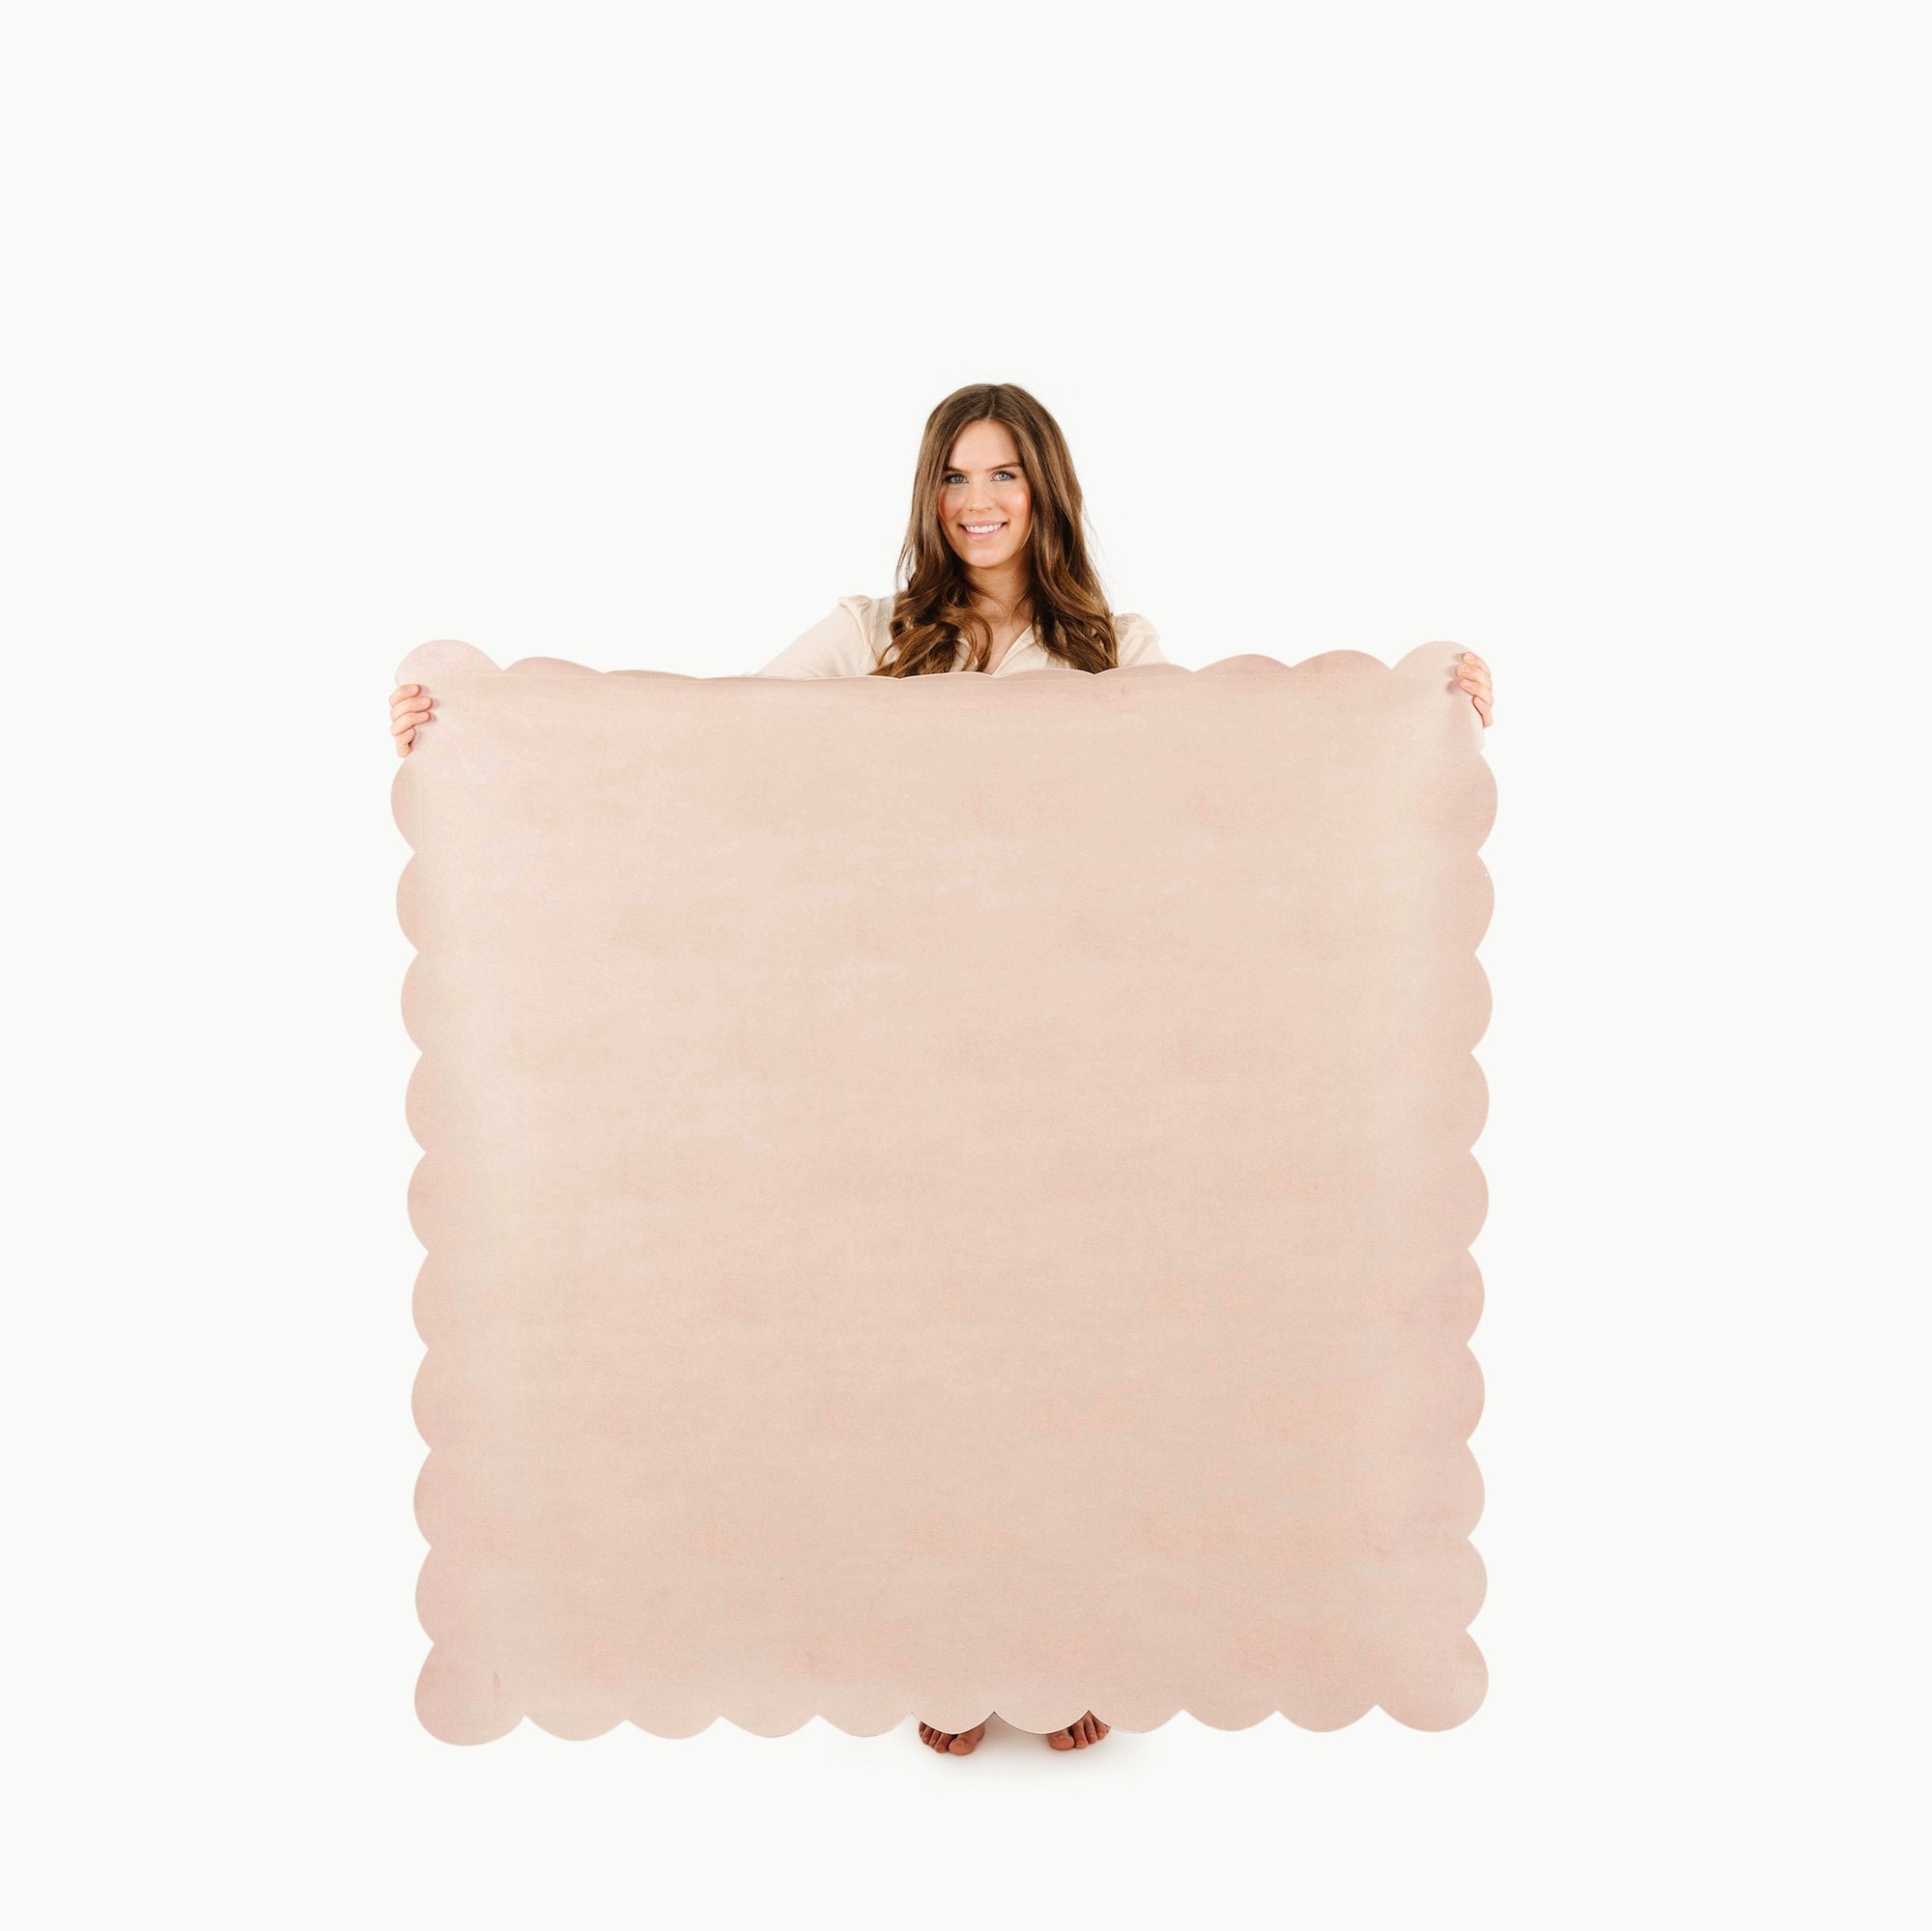 Untanned Scallop (on sale) / Square@Woman holding the Untanned Scallop Square Midi Mat